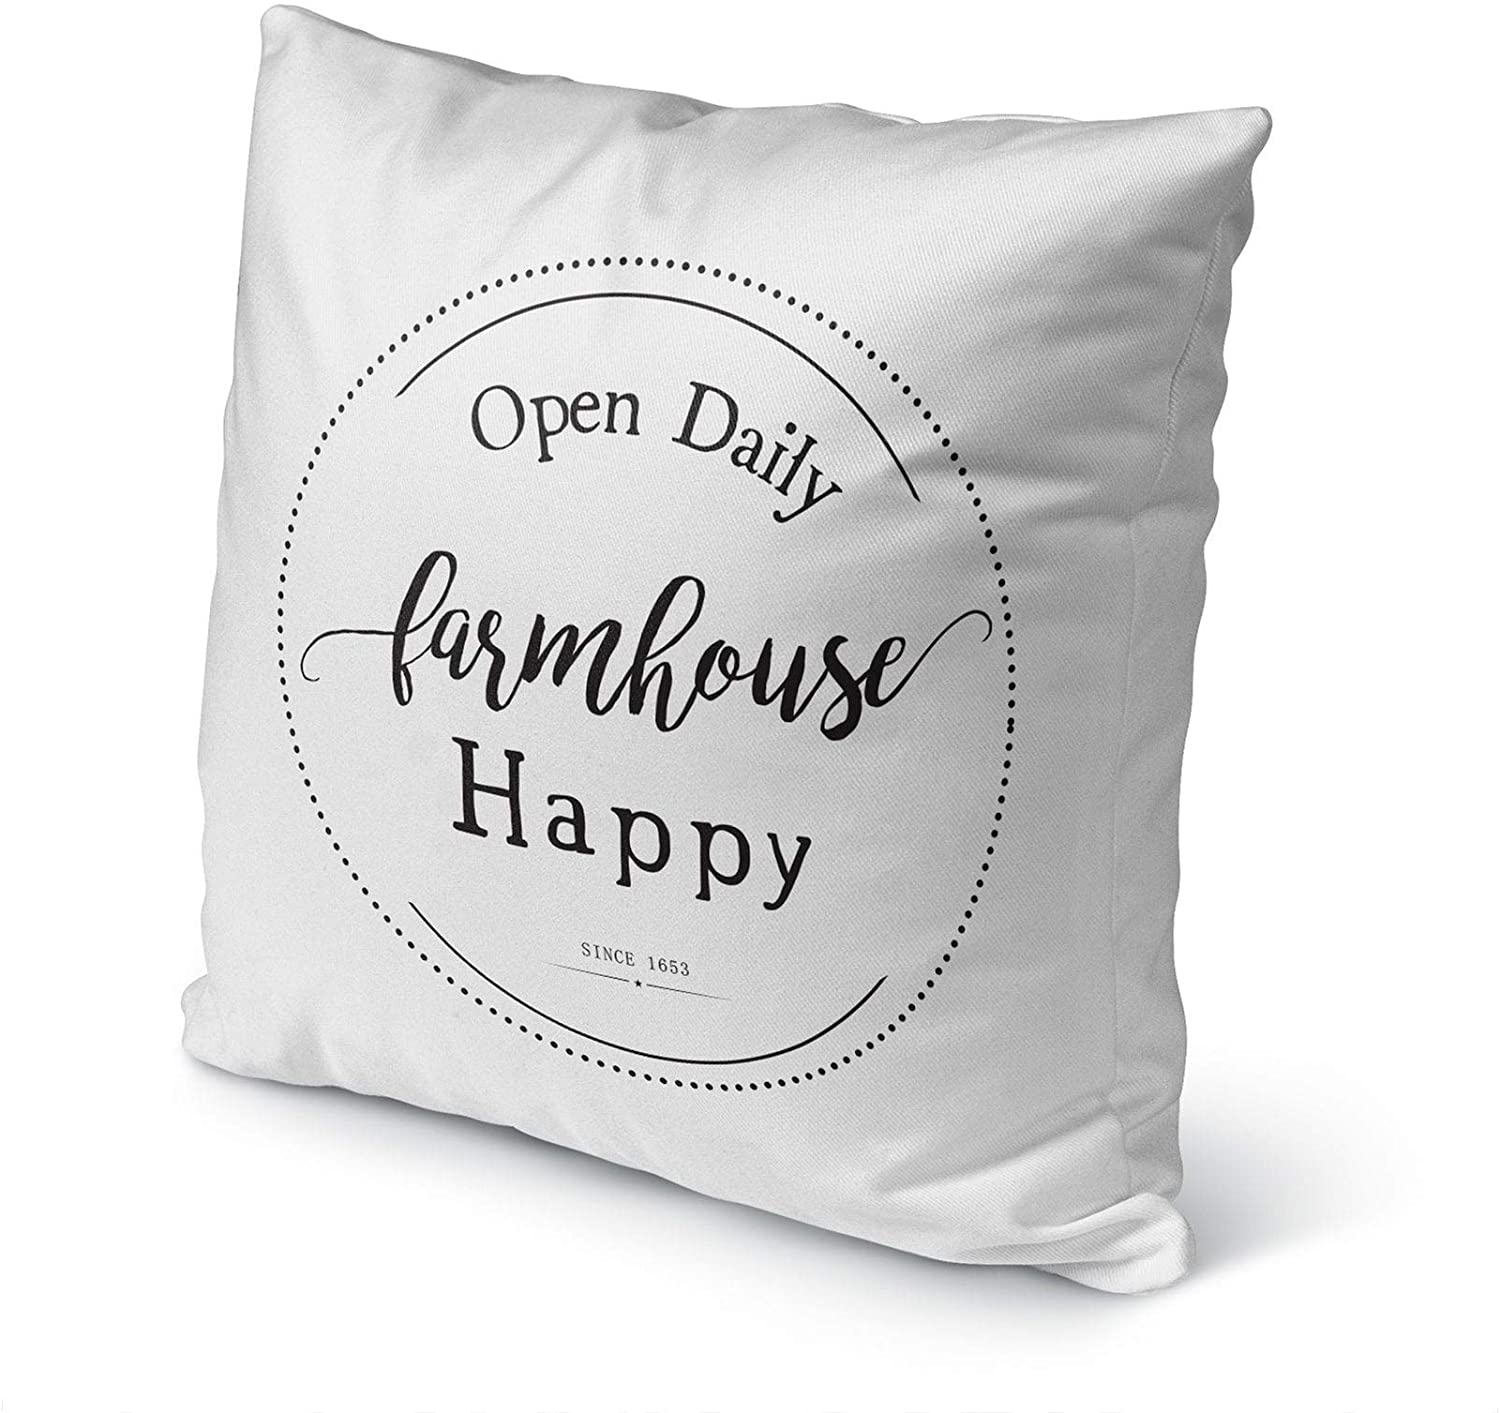 MISC Farmhouse Happy Indoor|Outdoor Pillow by 18x18 Black Farmhouse Polyester Removable Cover